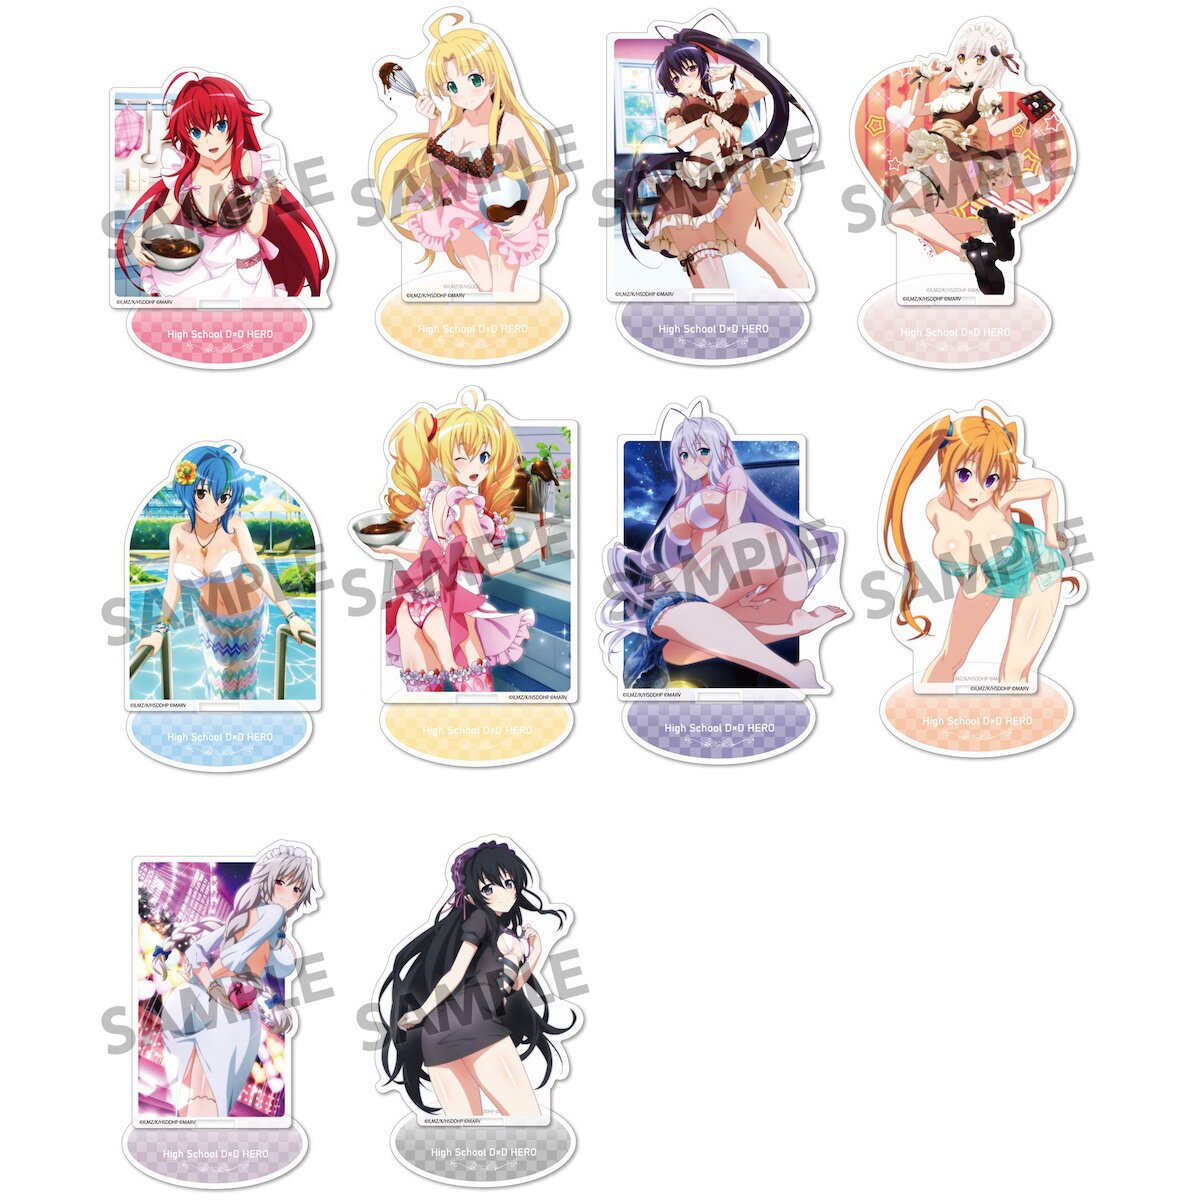 High School DXD Acrylic Figure Stand Officially Licensed 